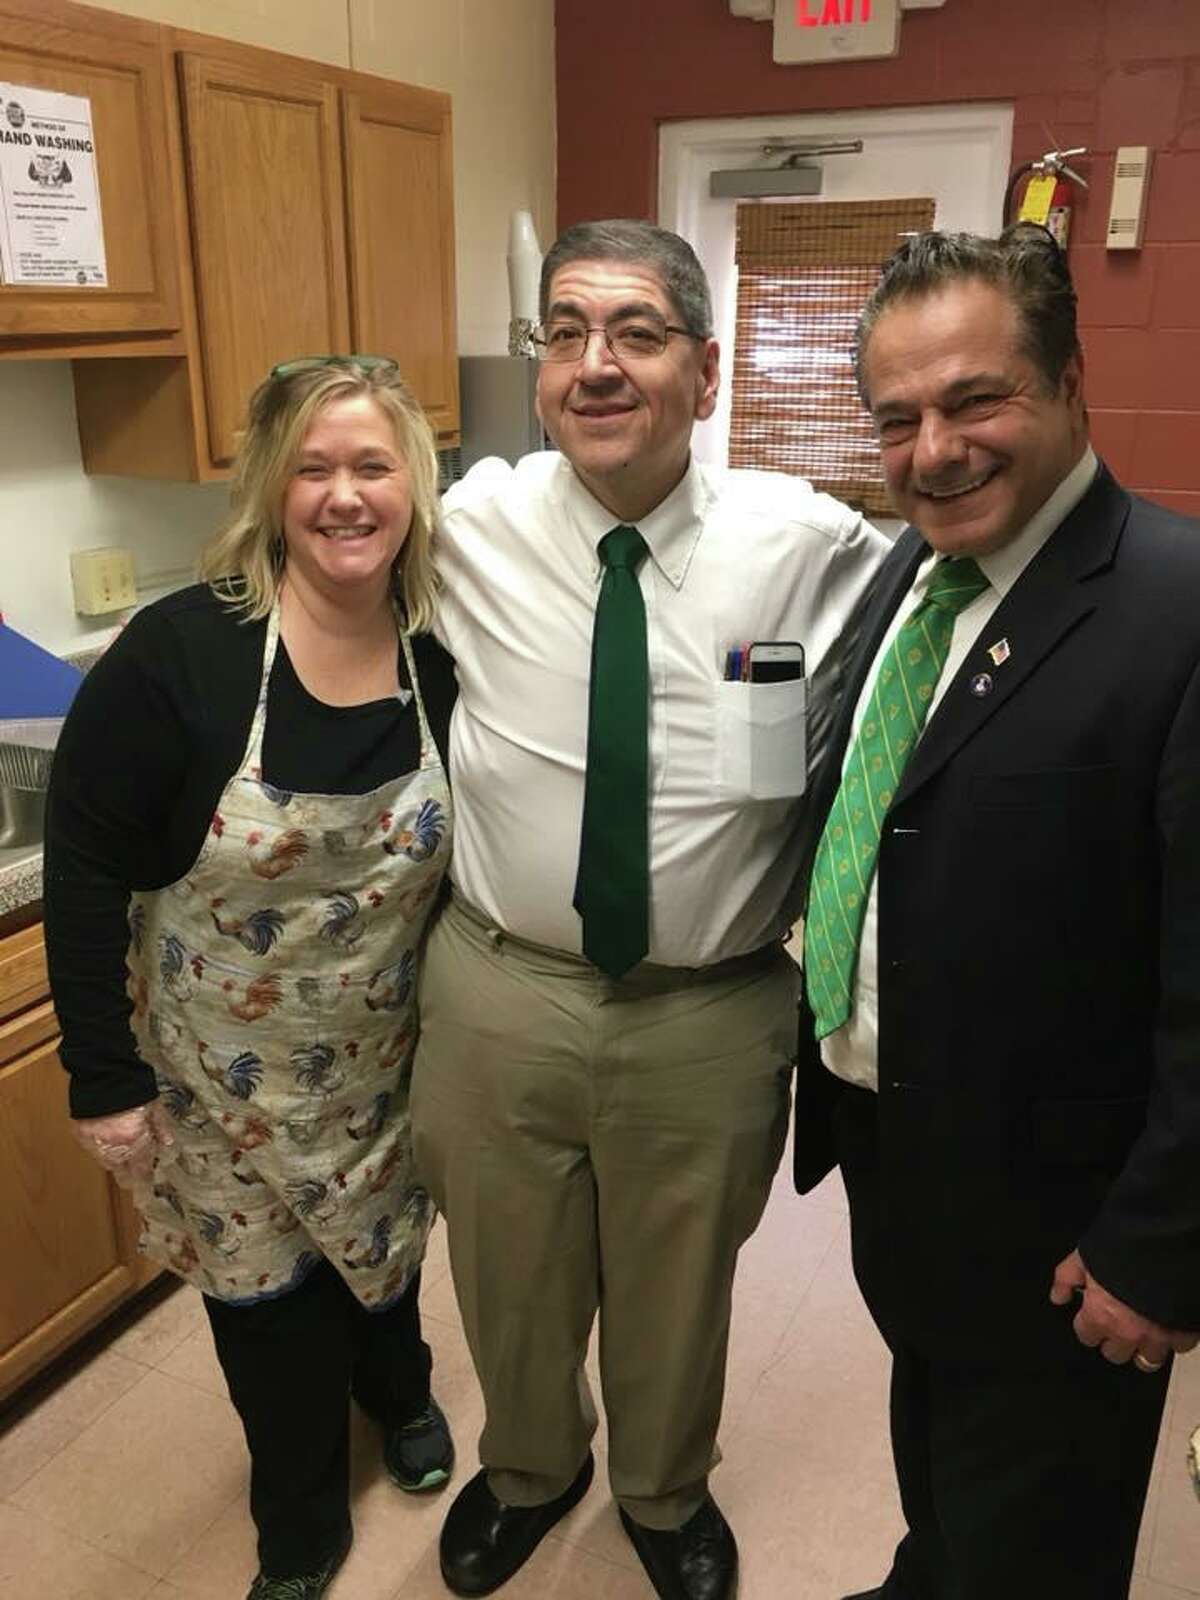 Ansonia Housing Authority Director Steven Nakano, center, with Ansonia Mayor David Cassetti, right, in a photo posted on the city’s Facebook page last March.